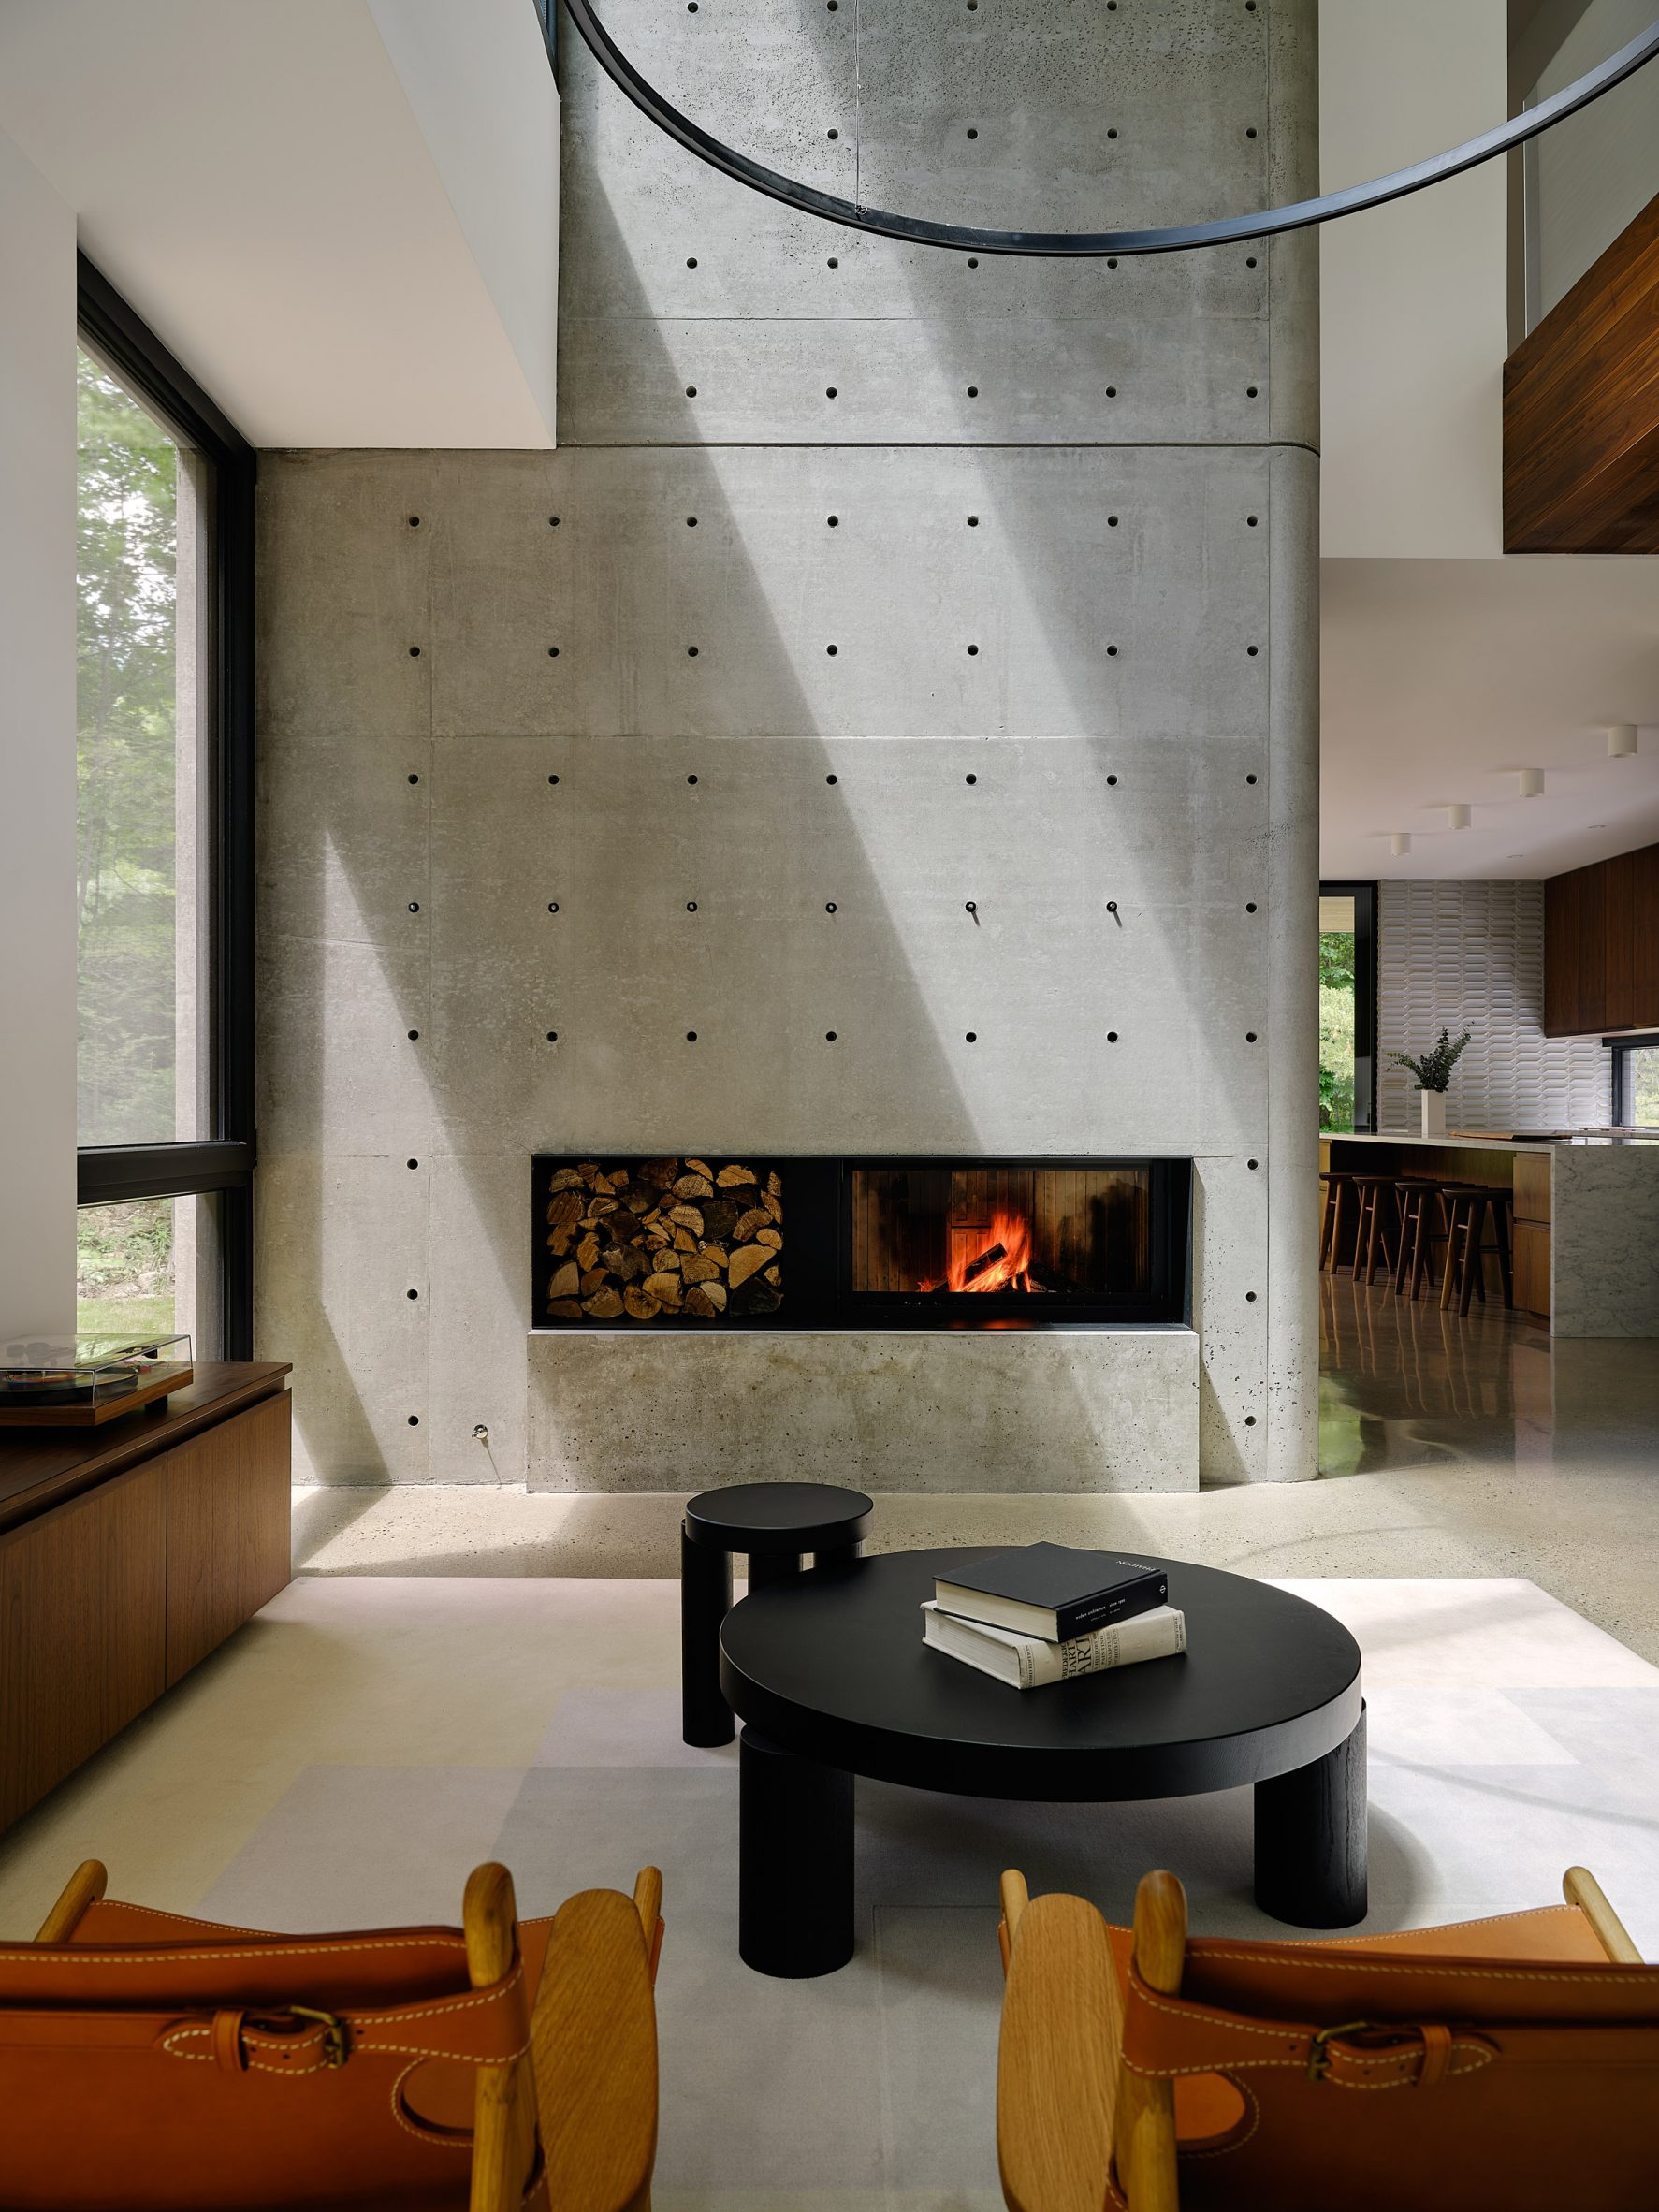 Exposed concrete fireplace